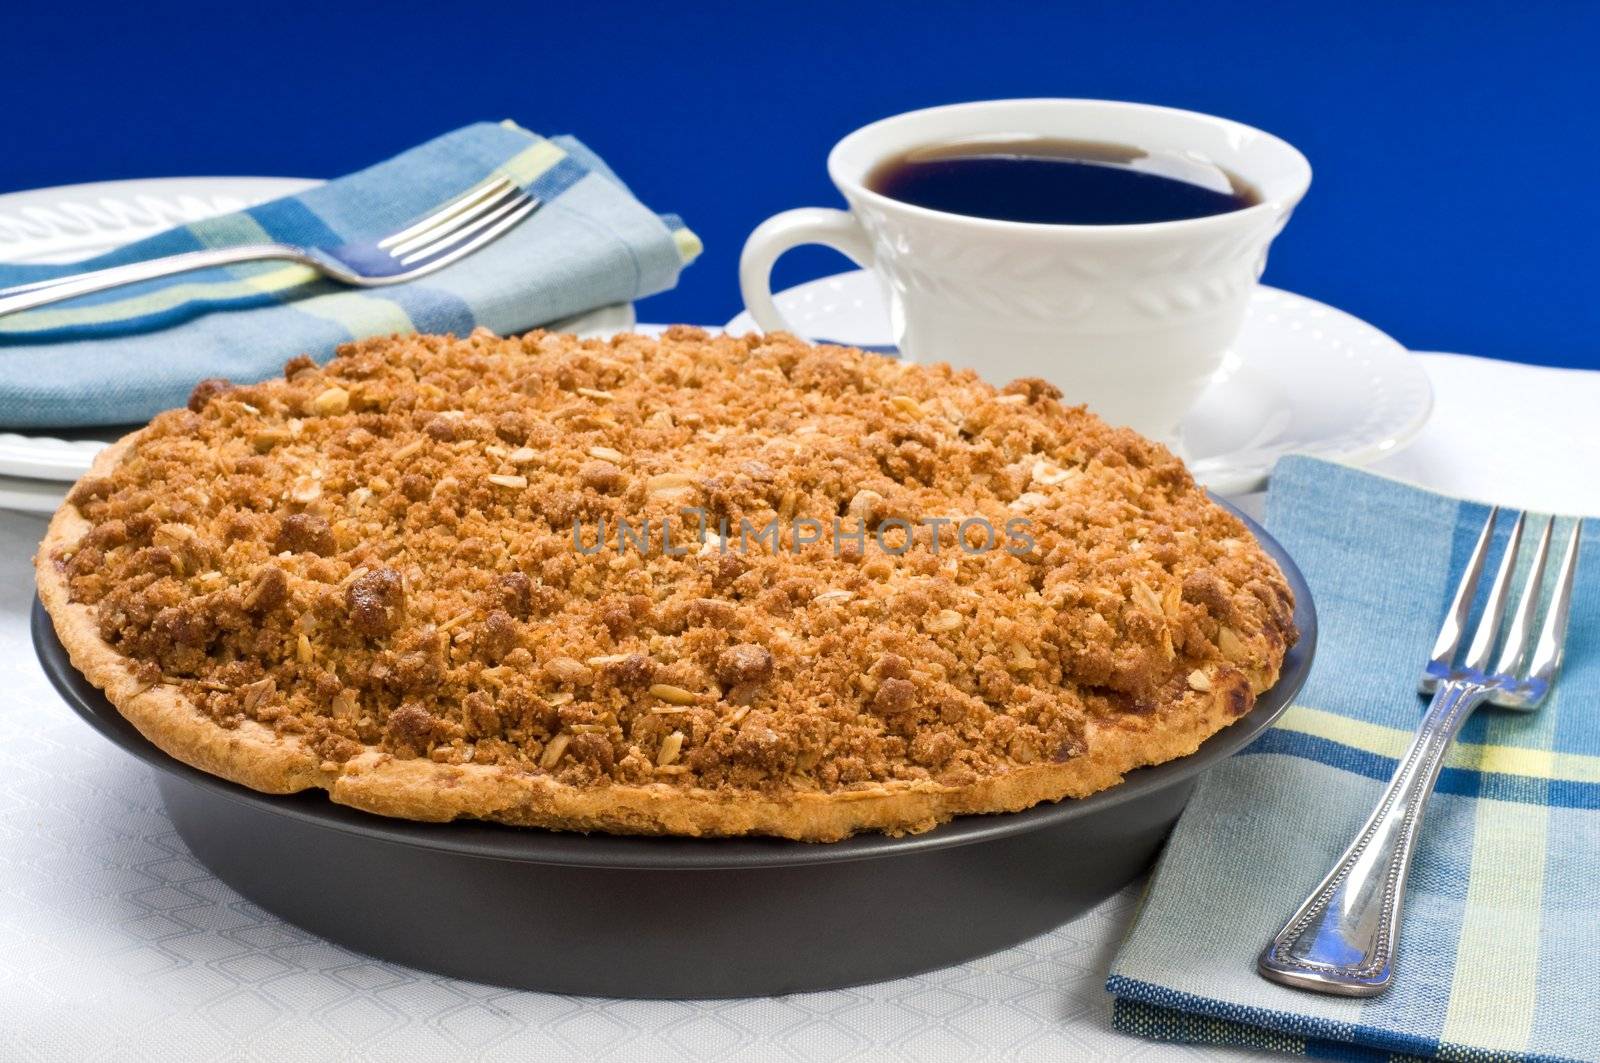 Fresh baked apple crumble pie and coffee.